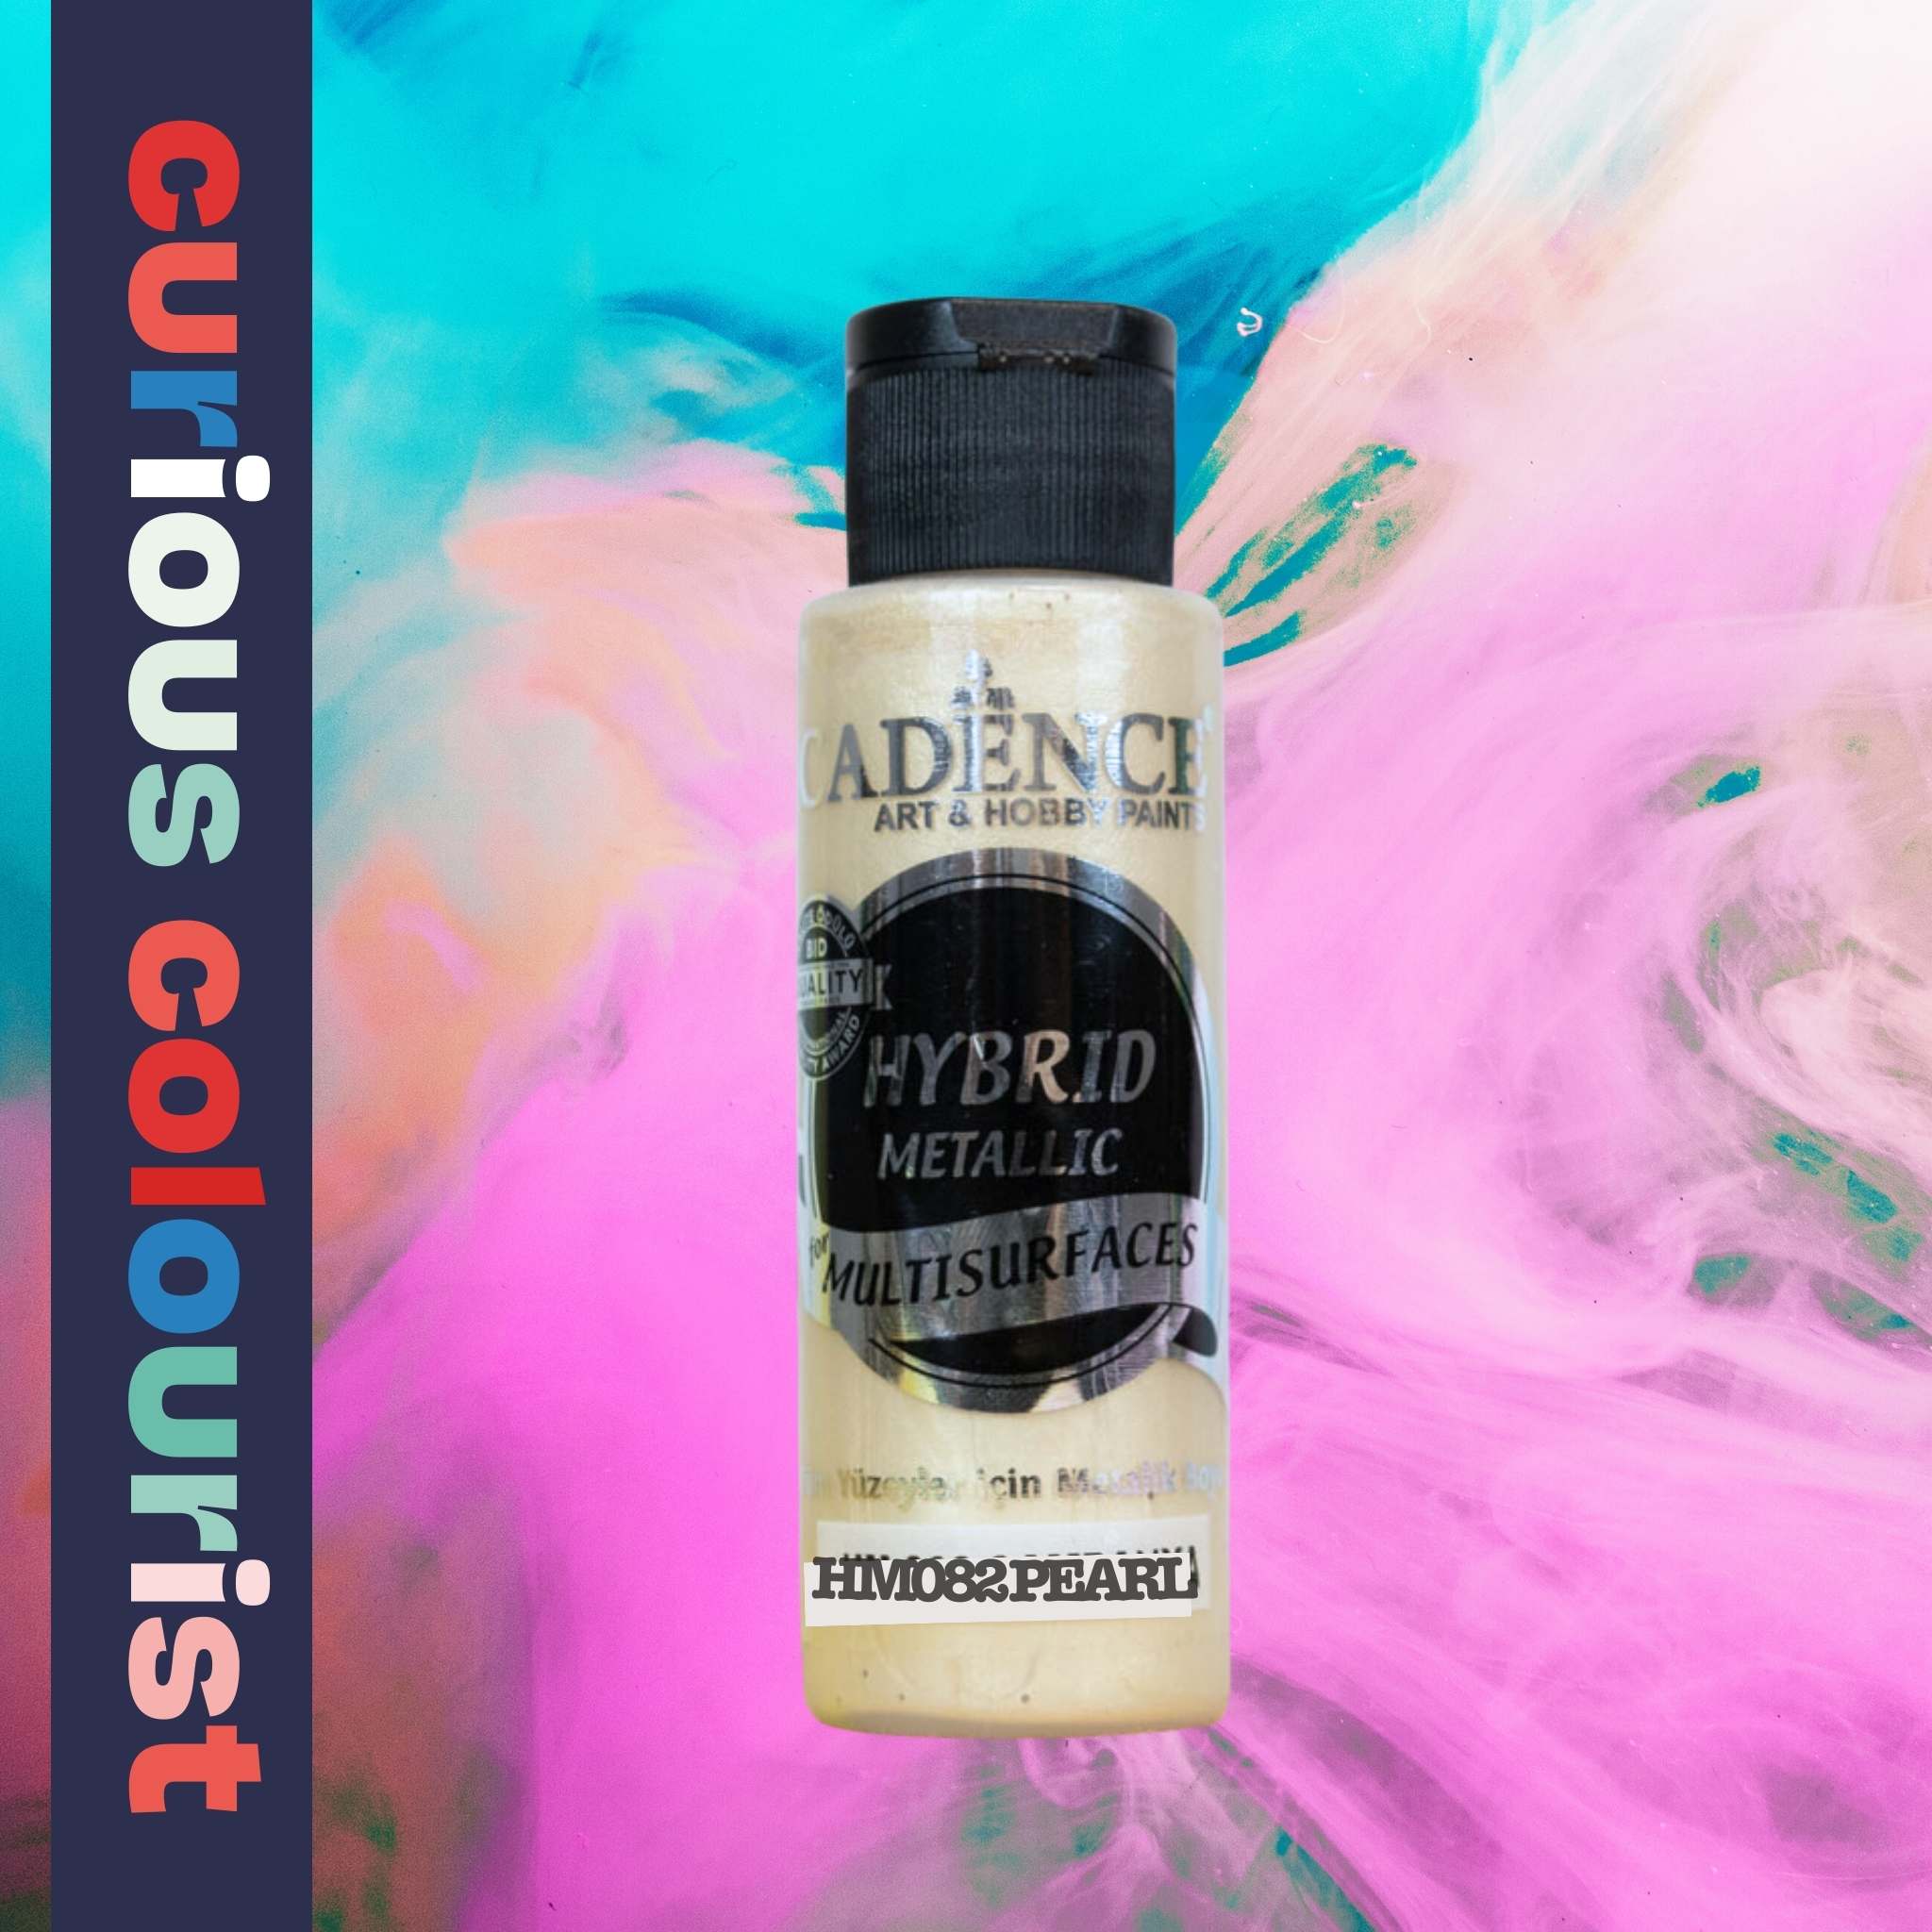 Pearl Satin effect metallic paint from Cadence, use for leather craft - make your leather projects pop with the addition of metallic effects, painting on leather to add highlights and shimmer.